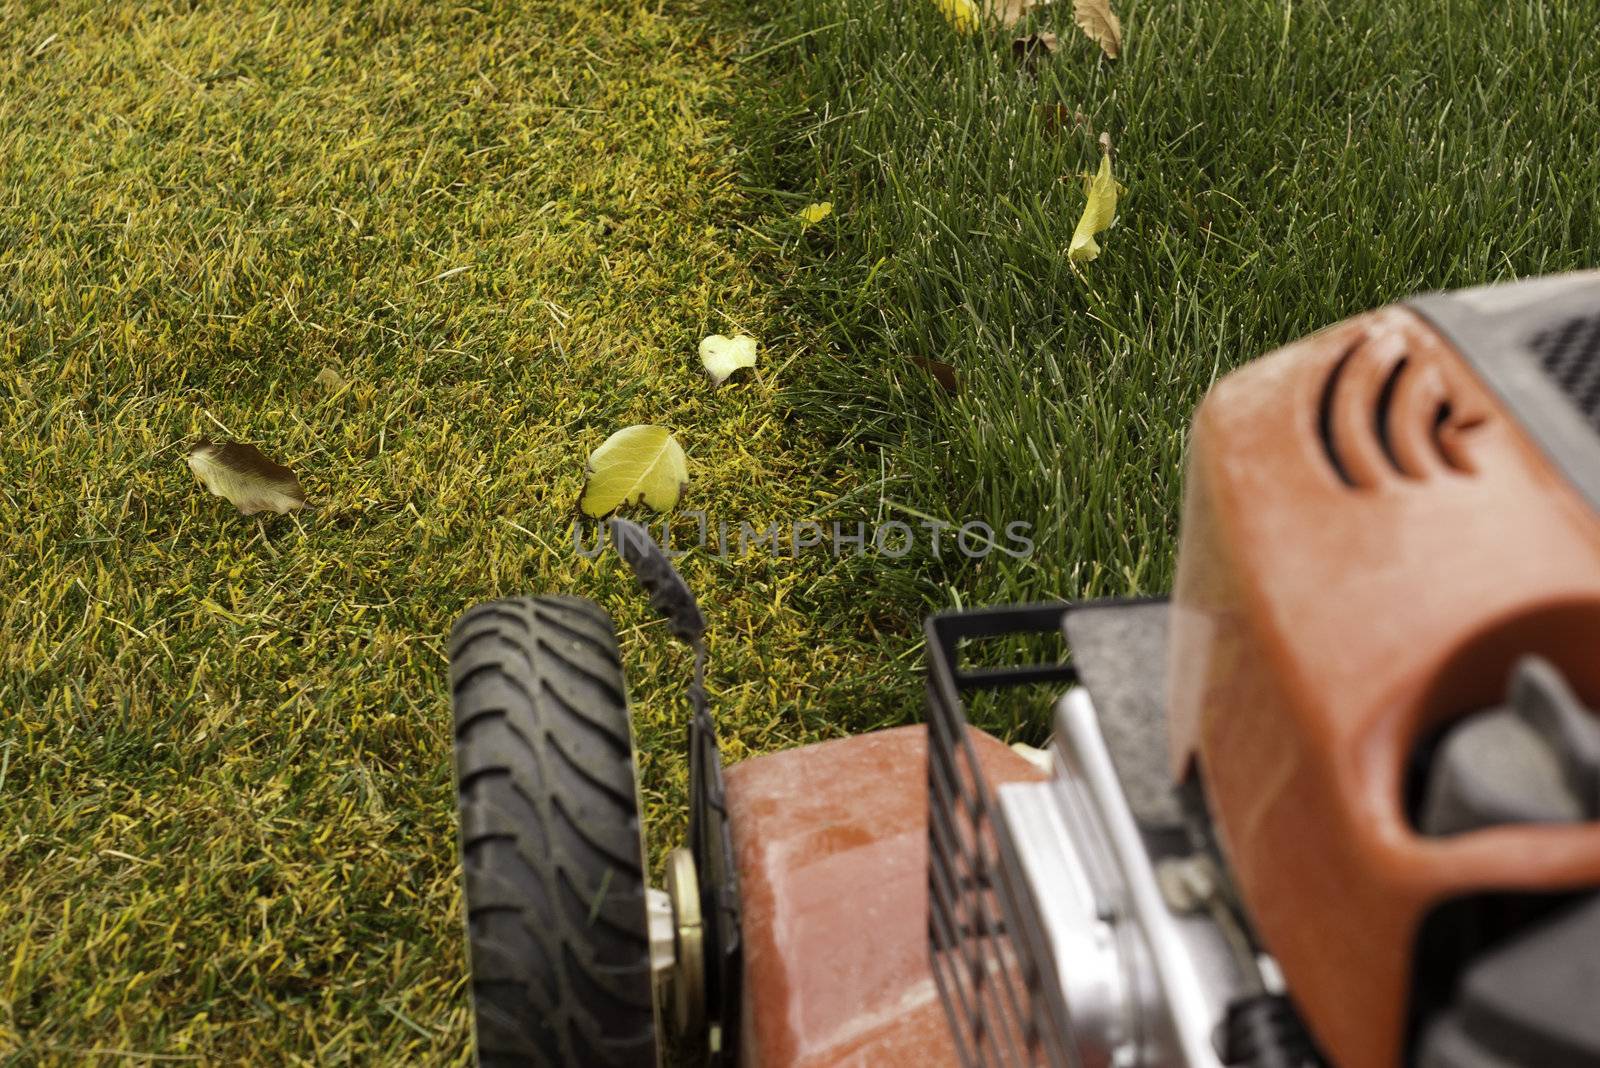 cut grass with lawnmower in fall by kjcimagery